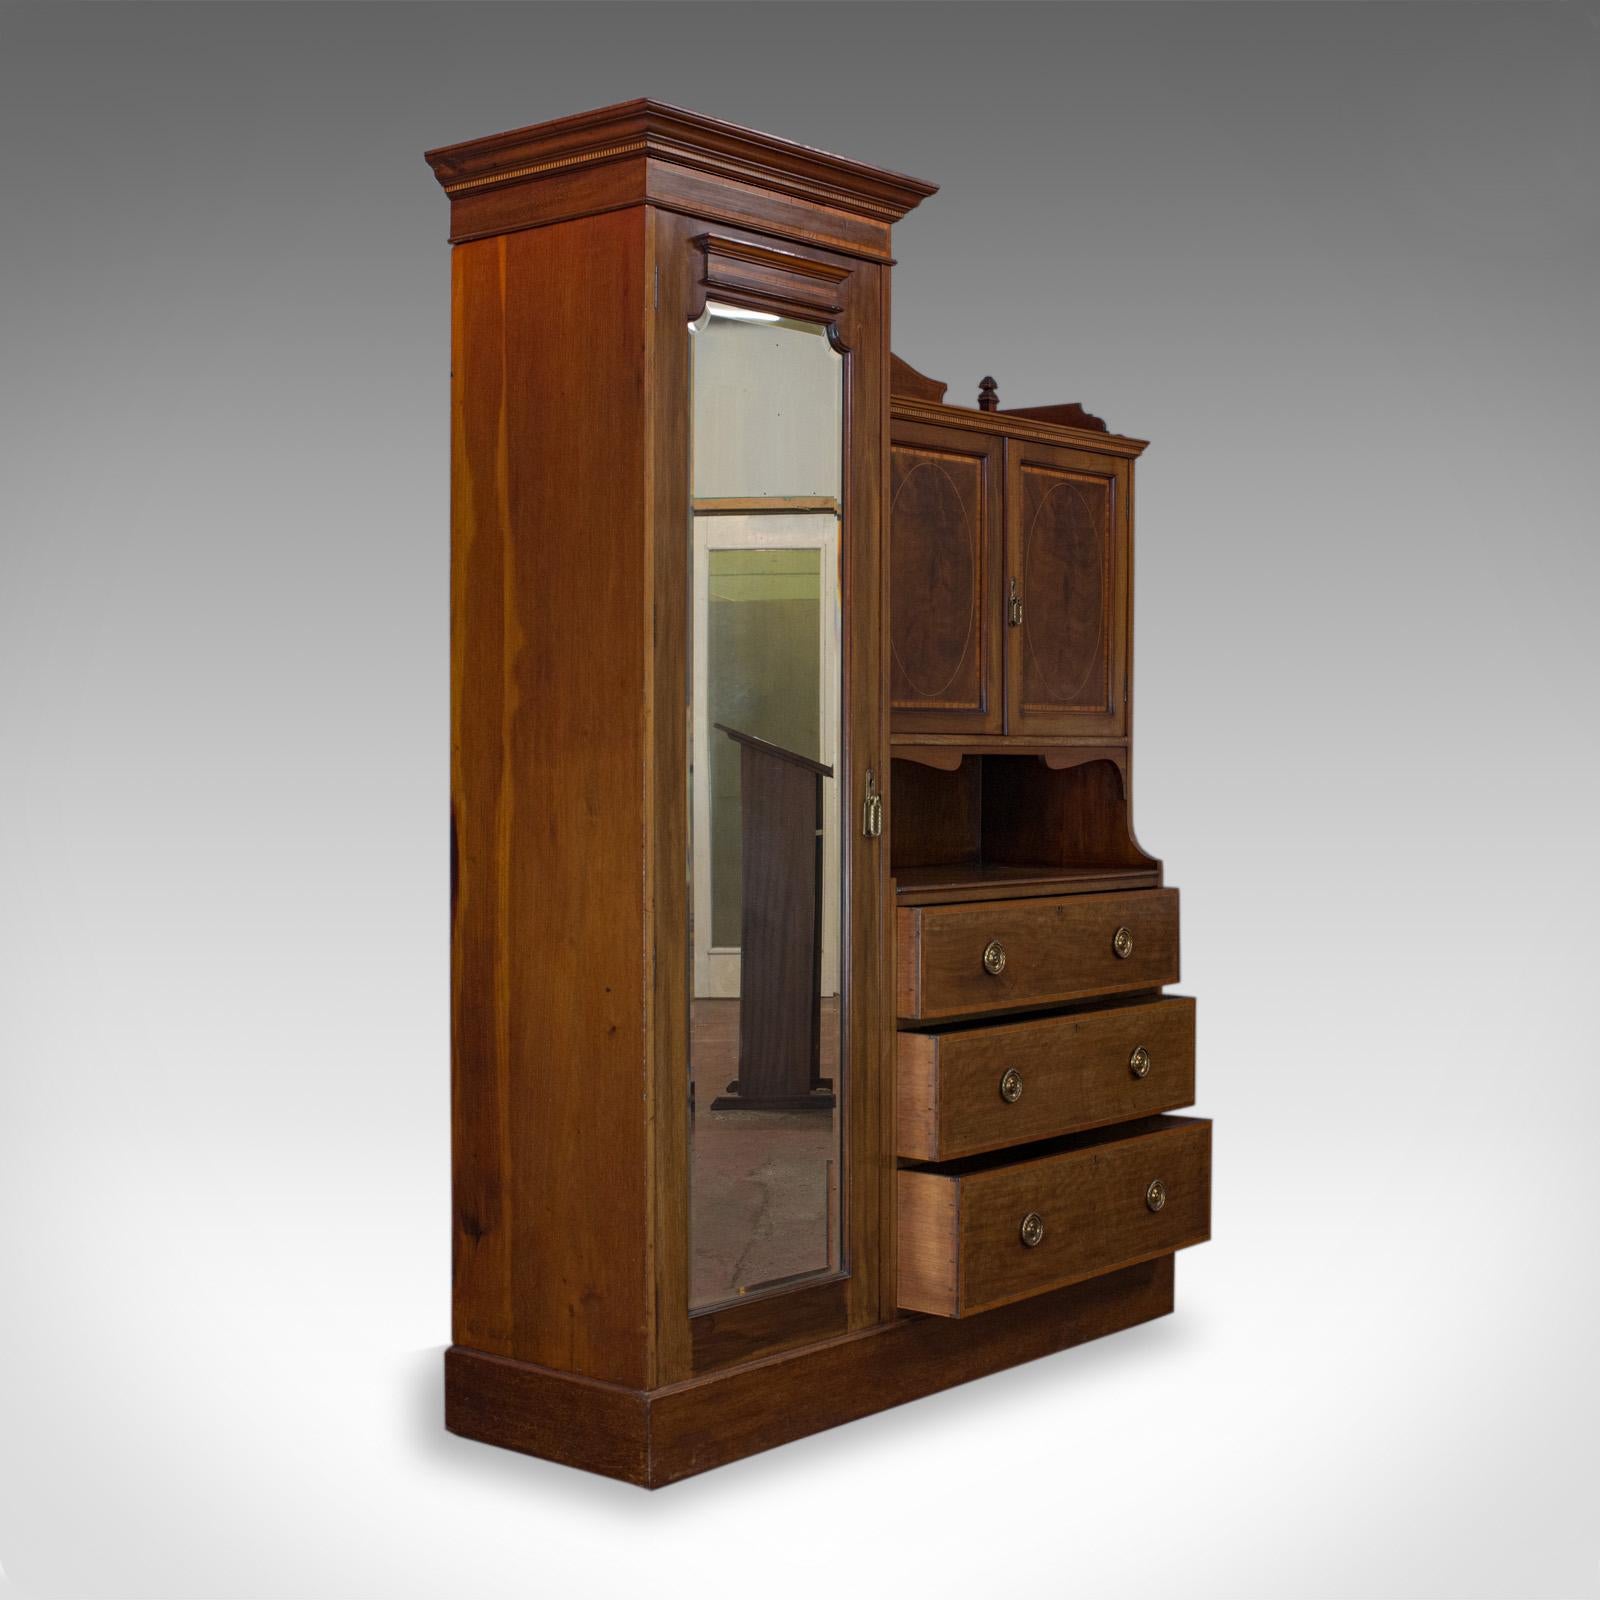 This is an antique mirrored wardrobe. An English, Edwardian, mahogany compactum darting to the early 20th century, circa 1910.

Select mahogany displays rich, russet hues
Attractive grain interest and a desirable aged patina
Deep crown moulding